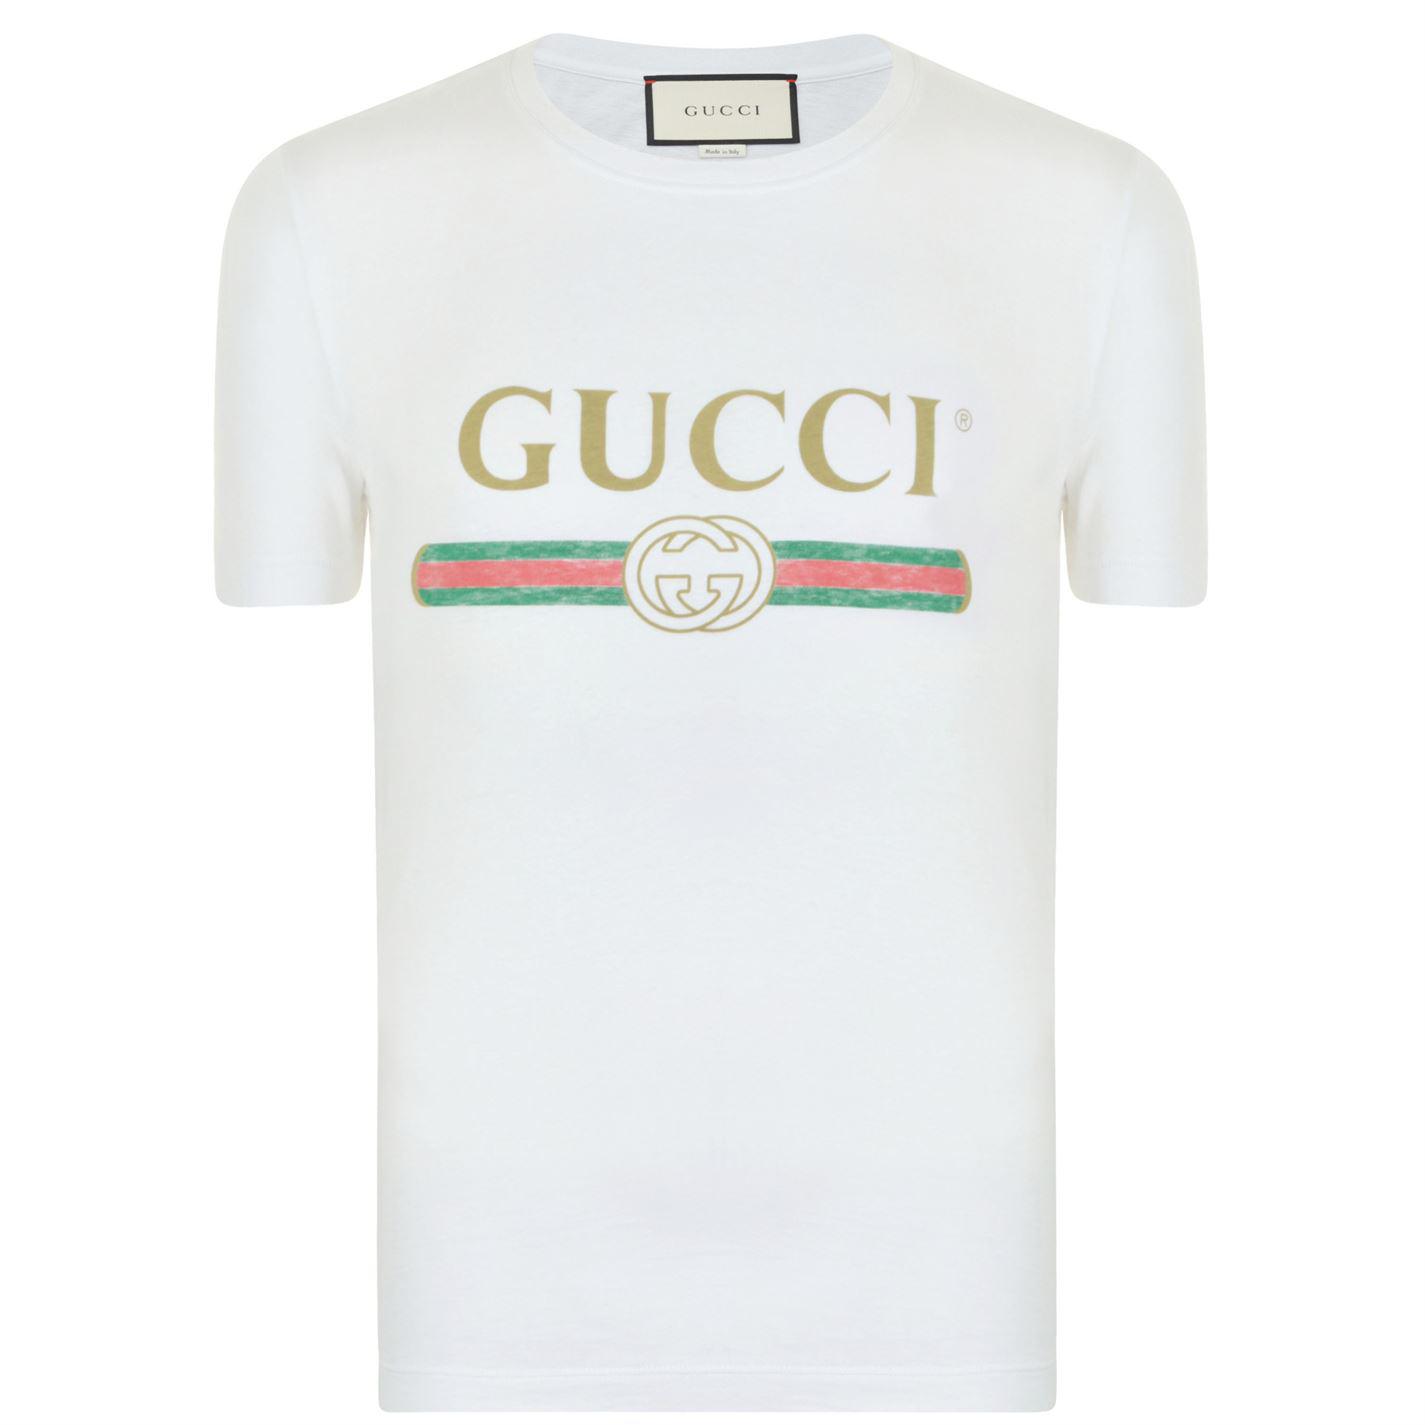 Lyst - Gucci Distressed Fake Logo T Shirt in White for Men